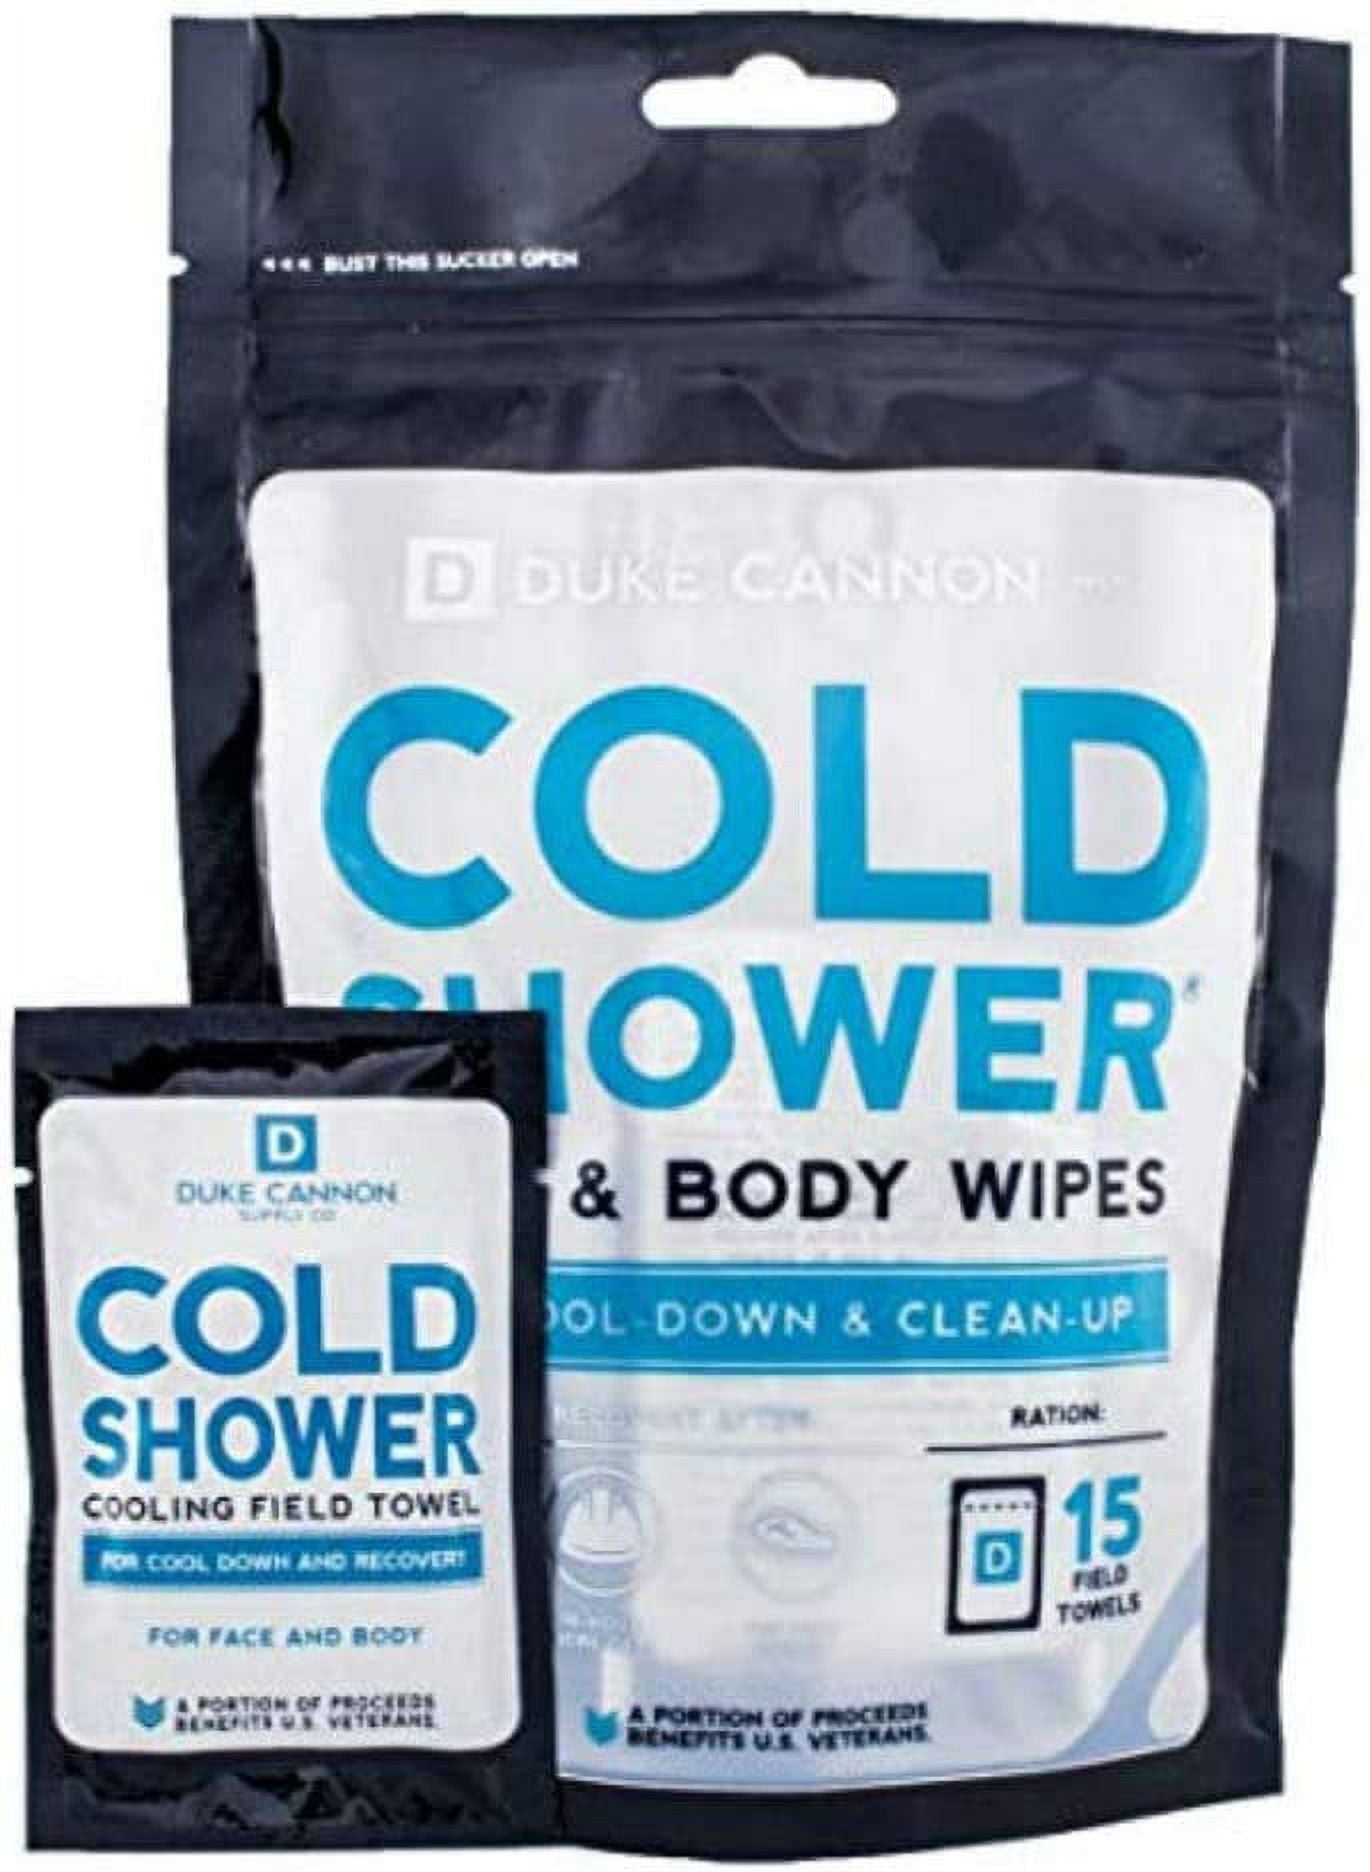 Duke Cannon Supply Co. Cold Shower Cooling Field Towel and Body Wipes, Pack  of 15 - Individually Wrapped Cooling Towelettes for Face, Hands and Body